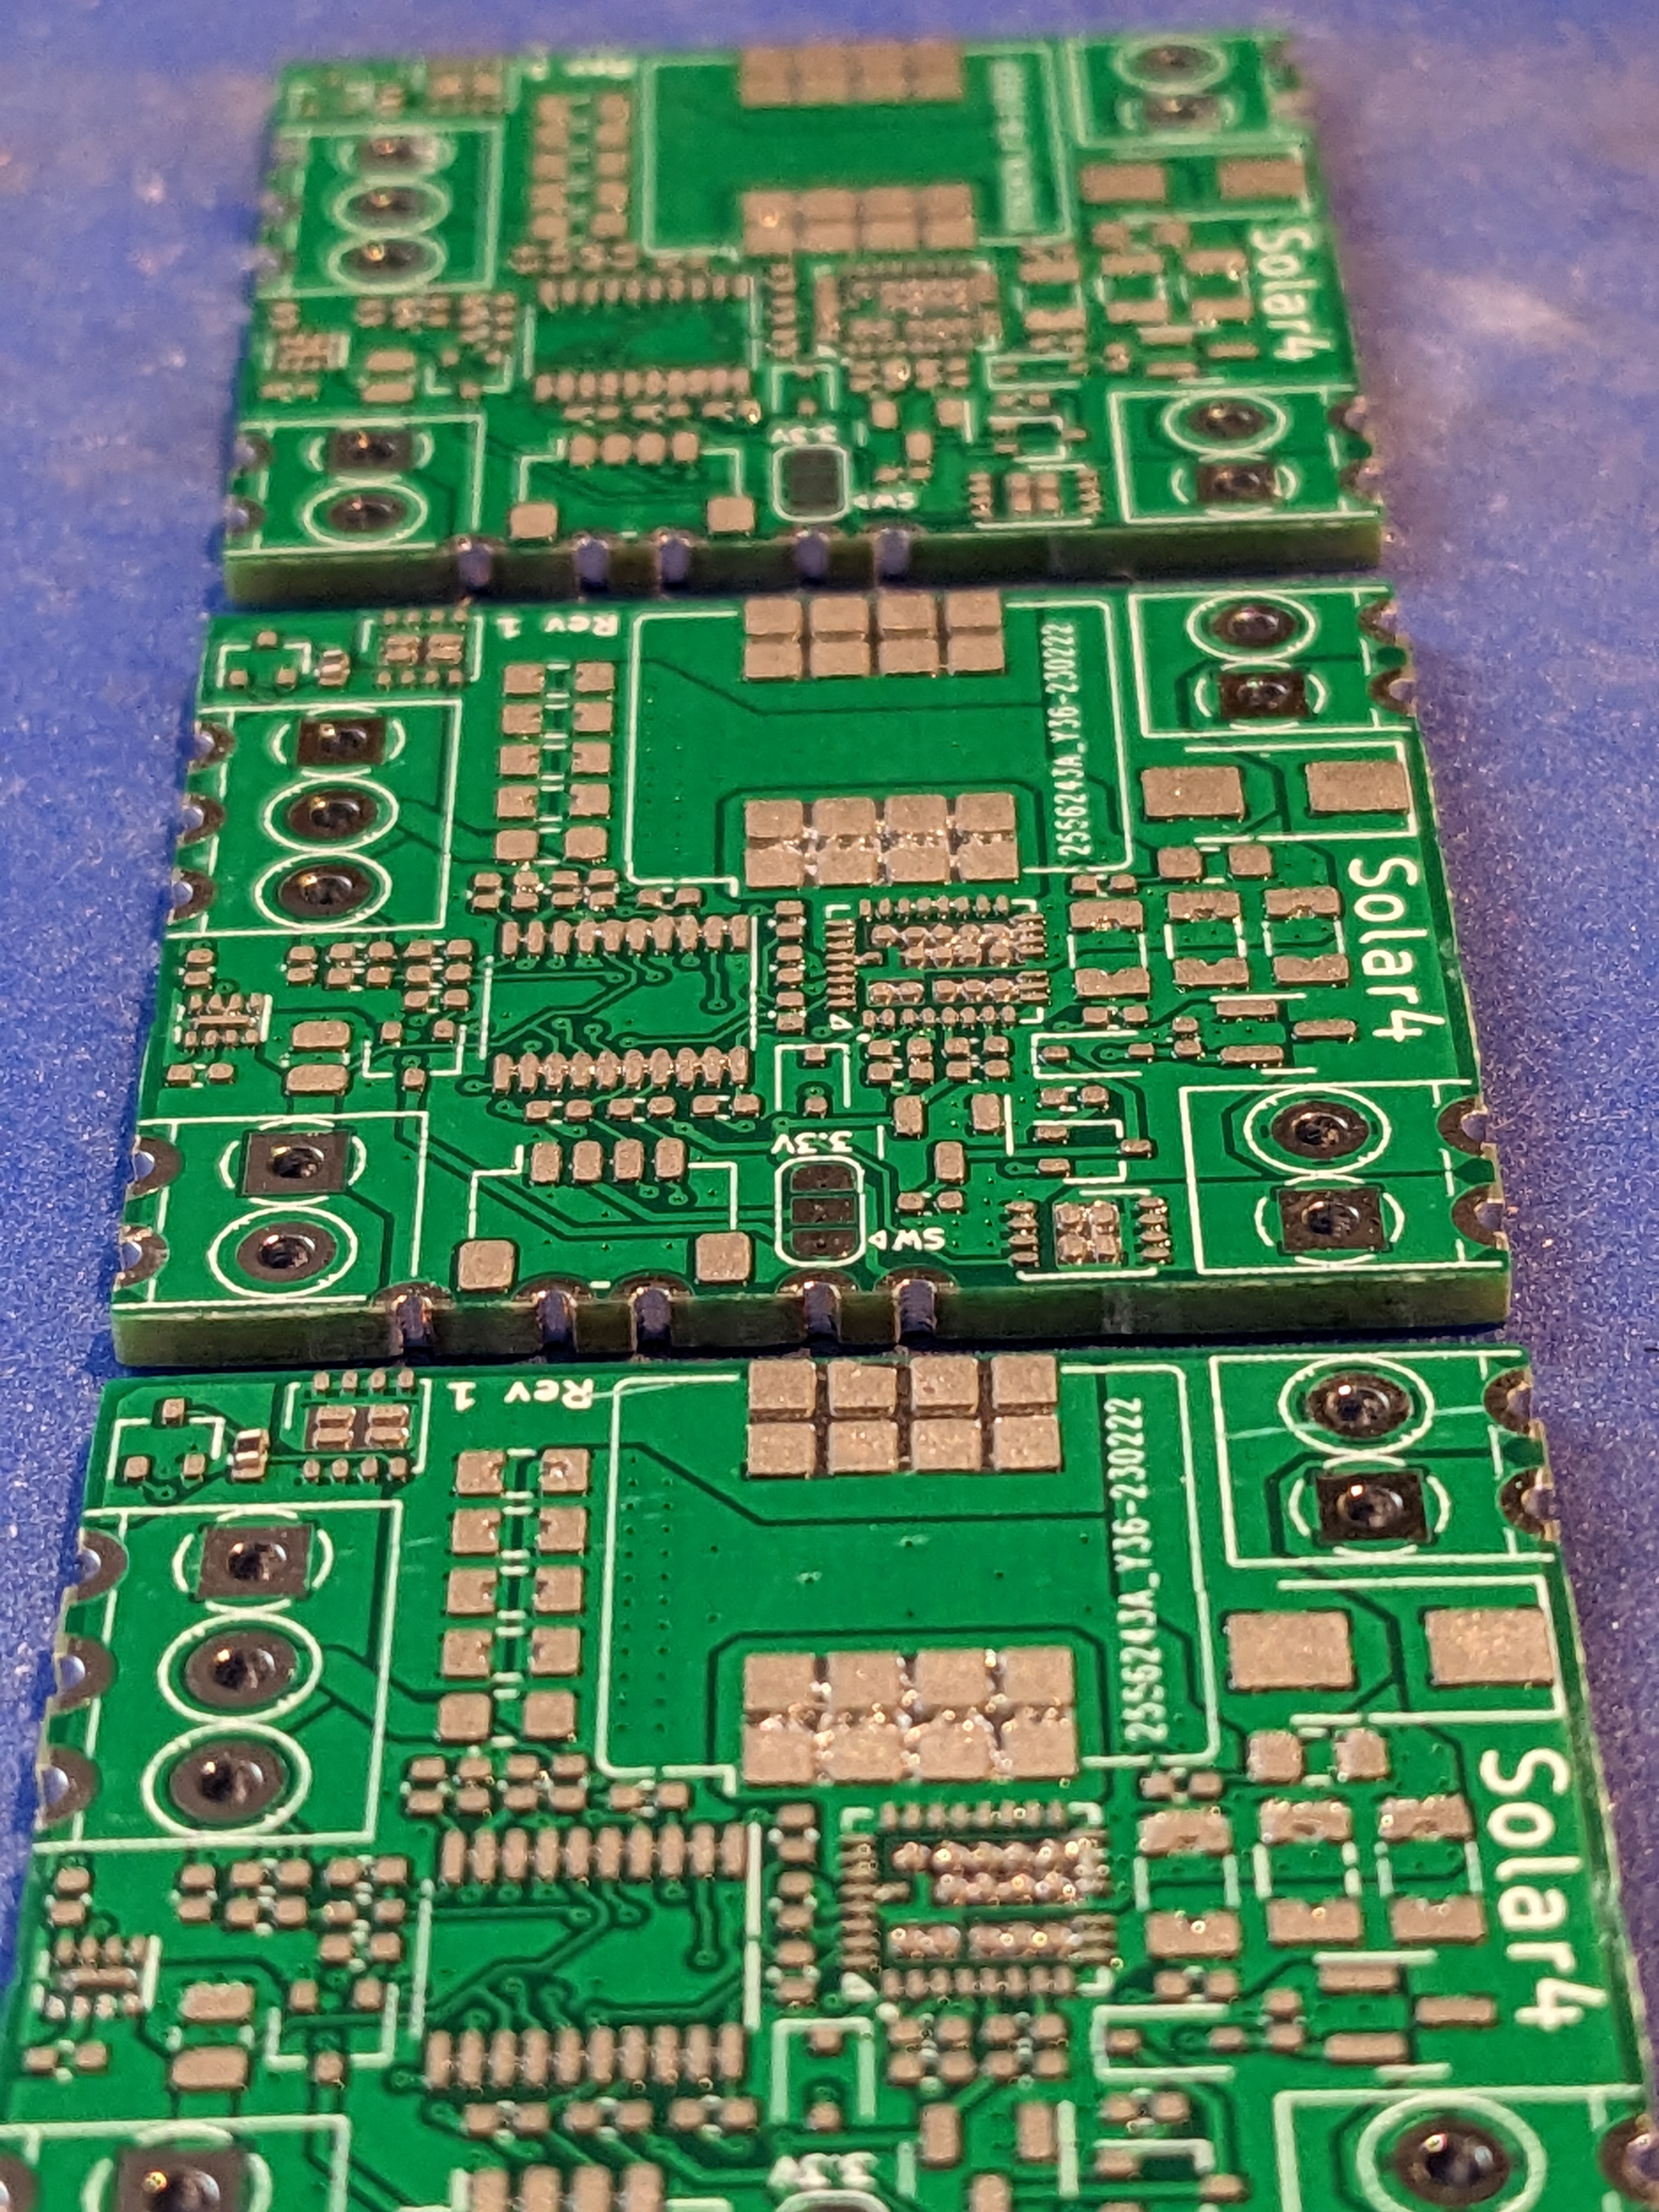 PCBs with solder paste applied